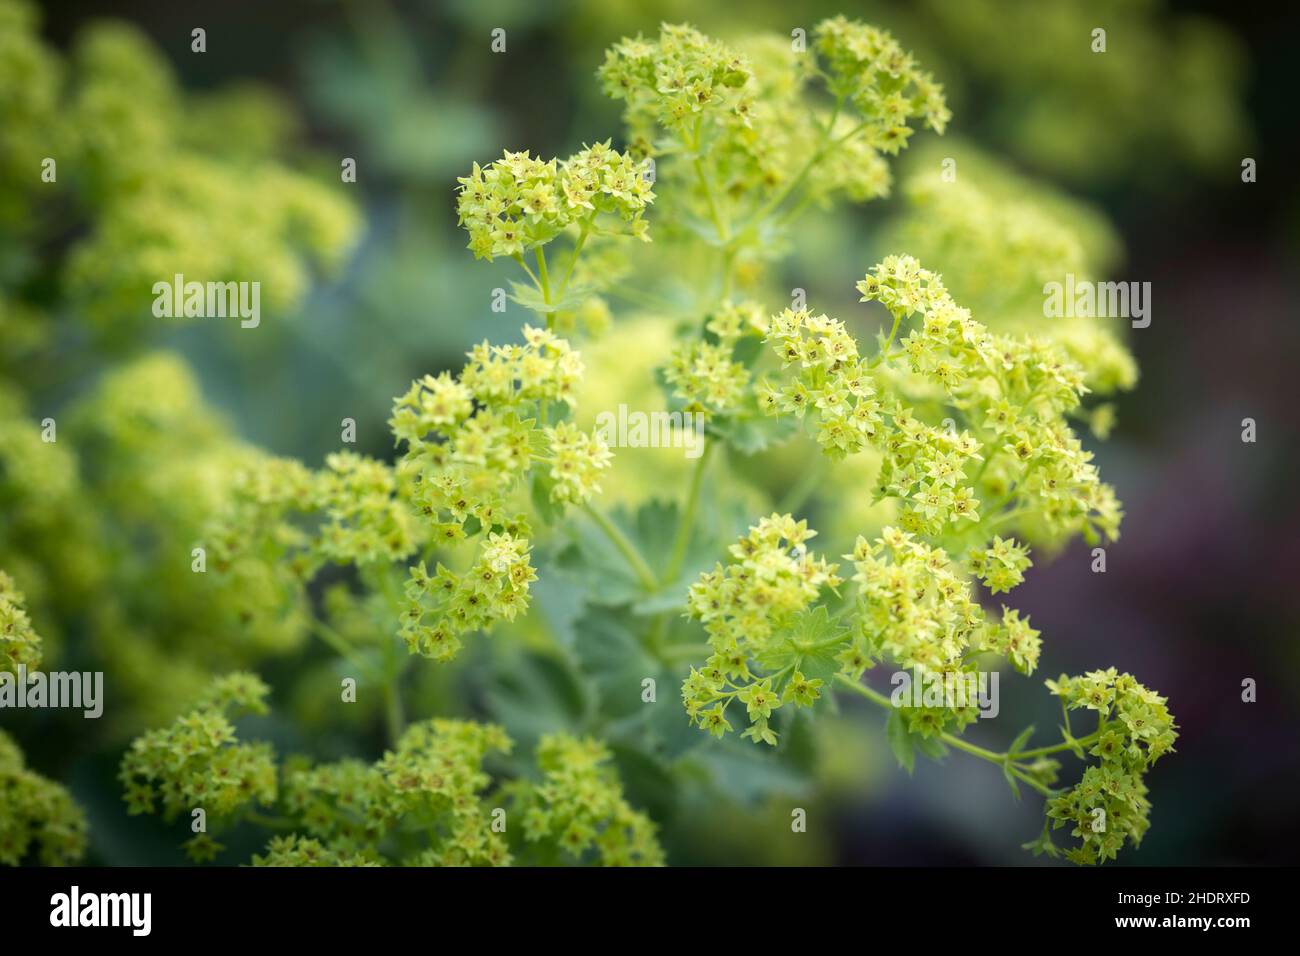 herb, lady's mantle, herbs, lady's mantles Stock Photo